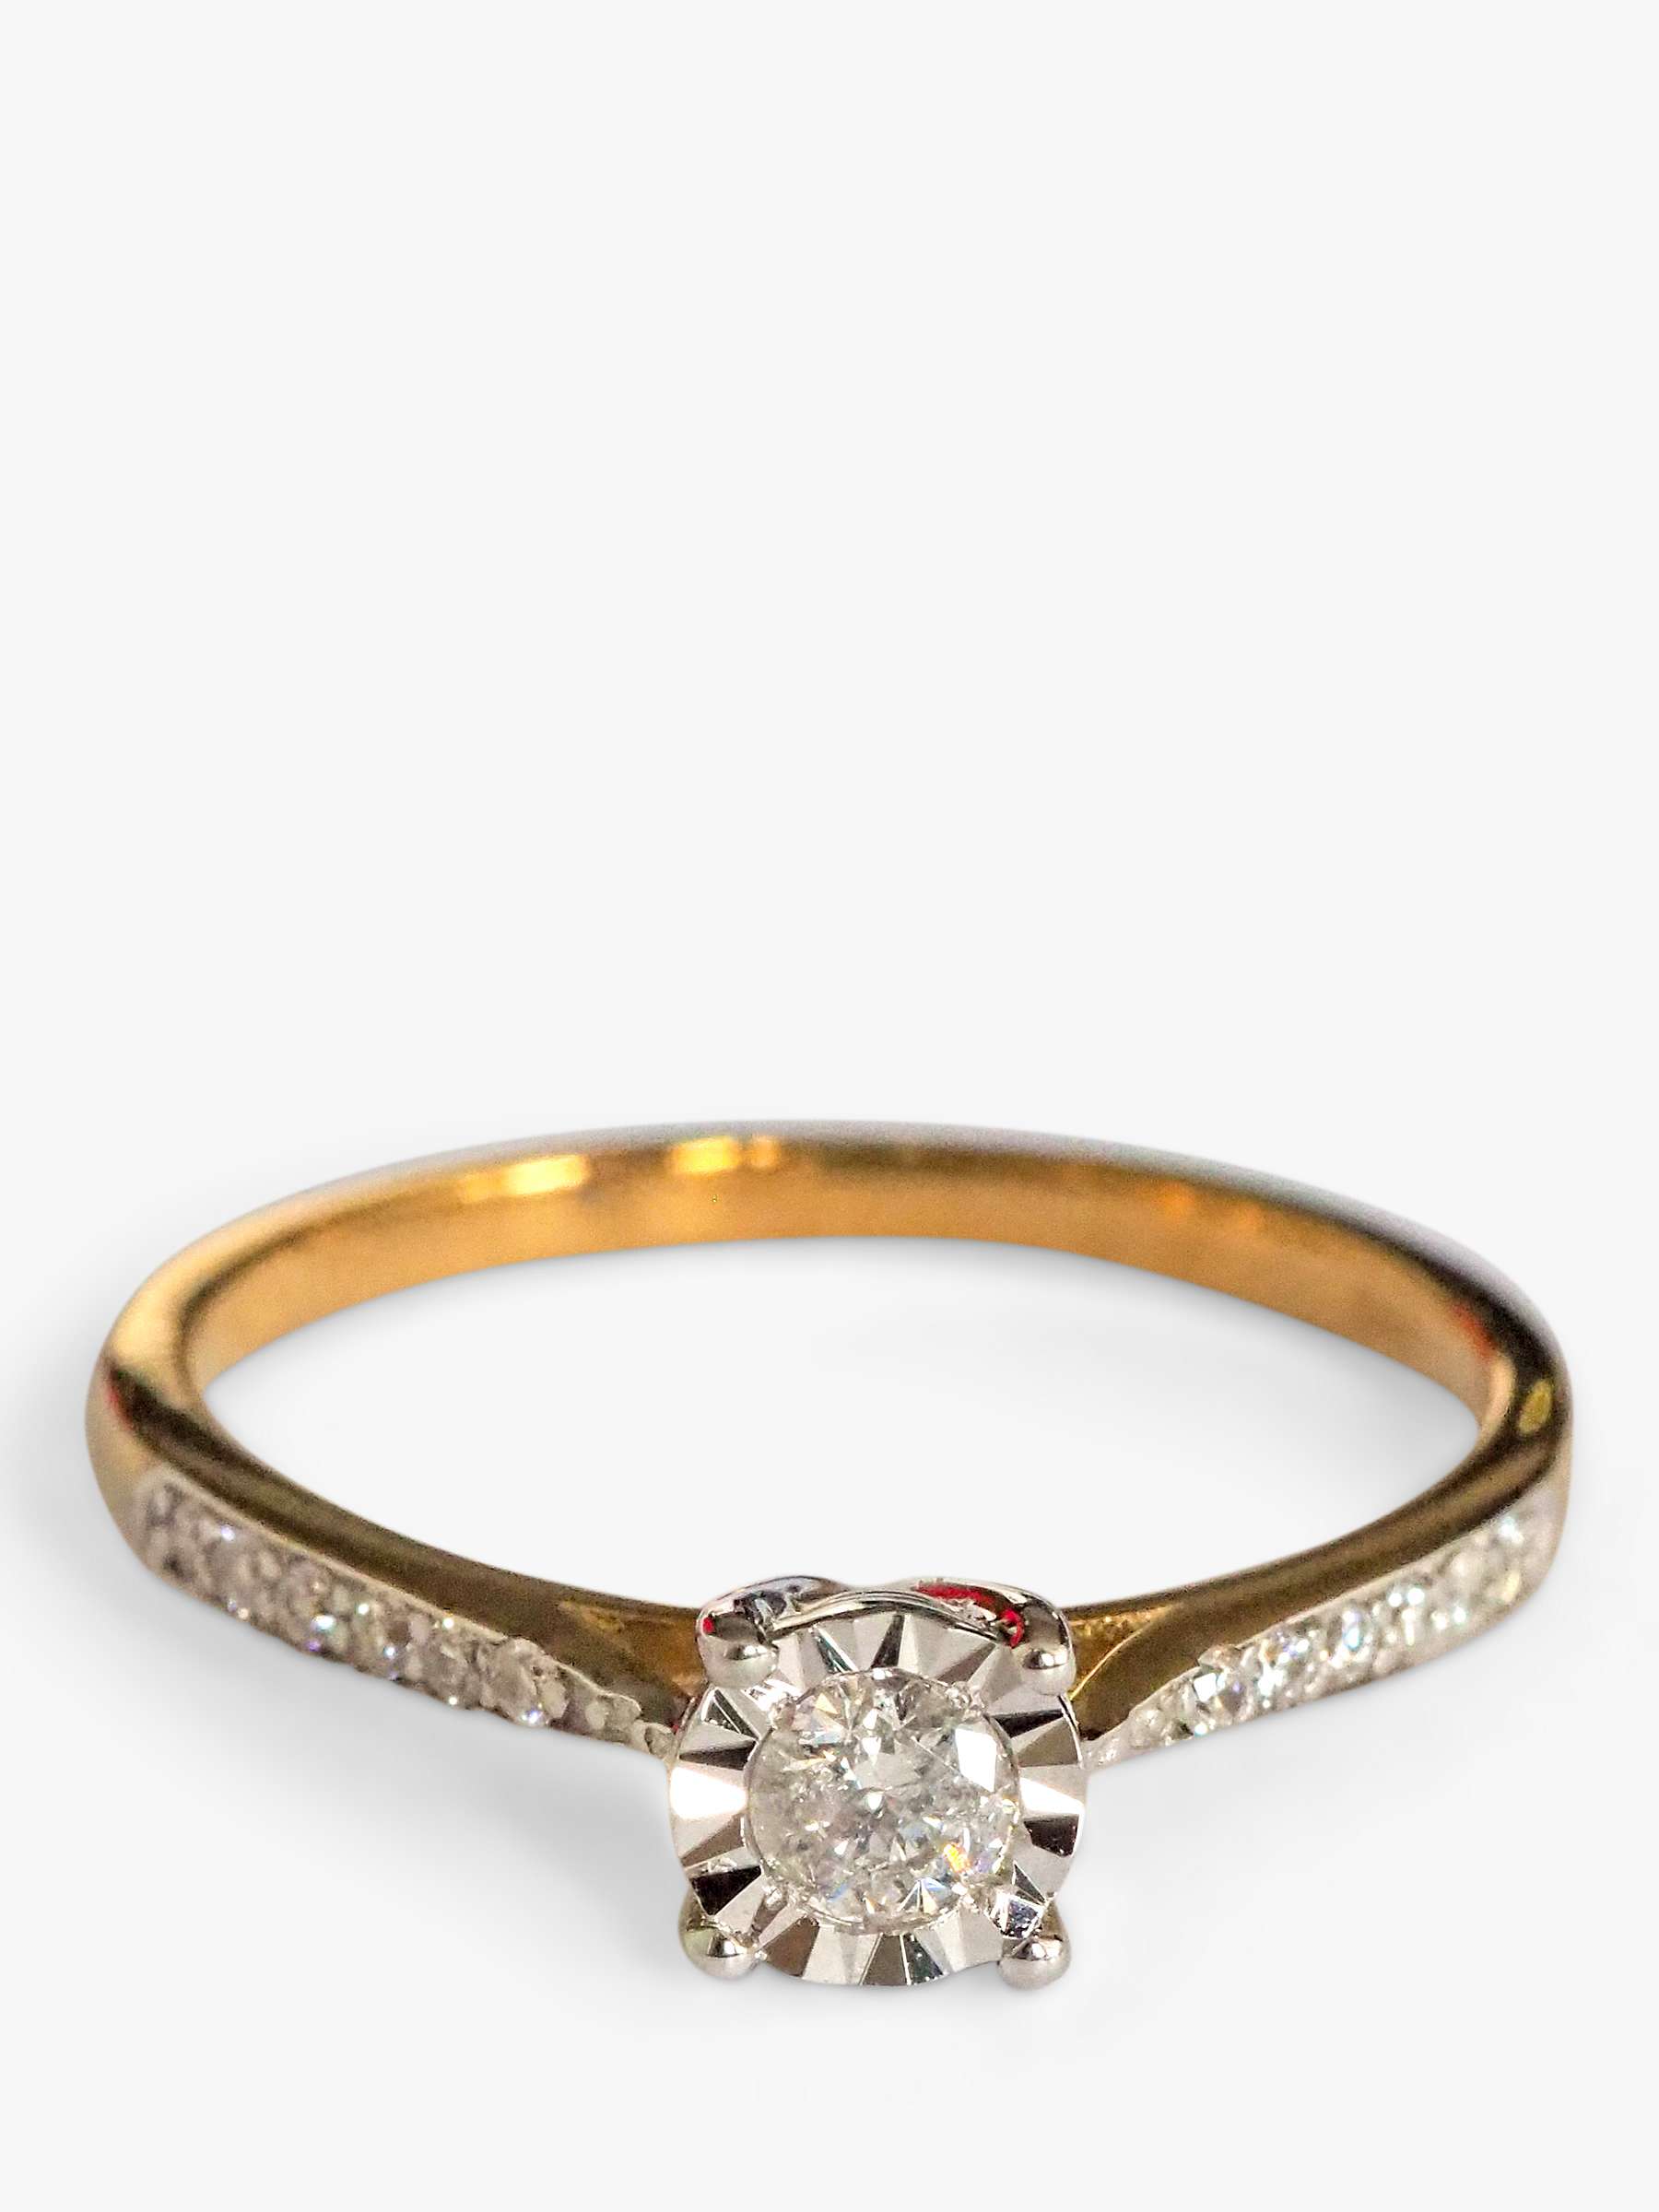 Buy L & T Heirlooms Second Hand 9ct Gold Diamond Engagement Ring Online at johnlewis.com